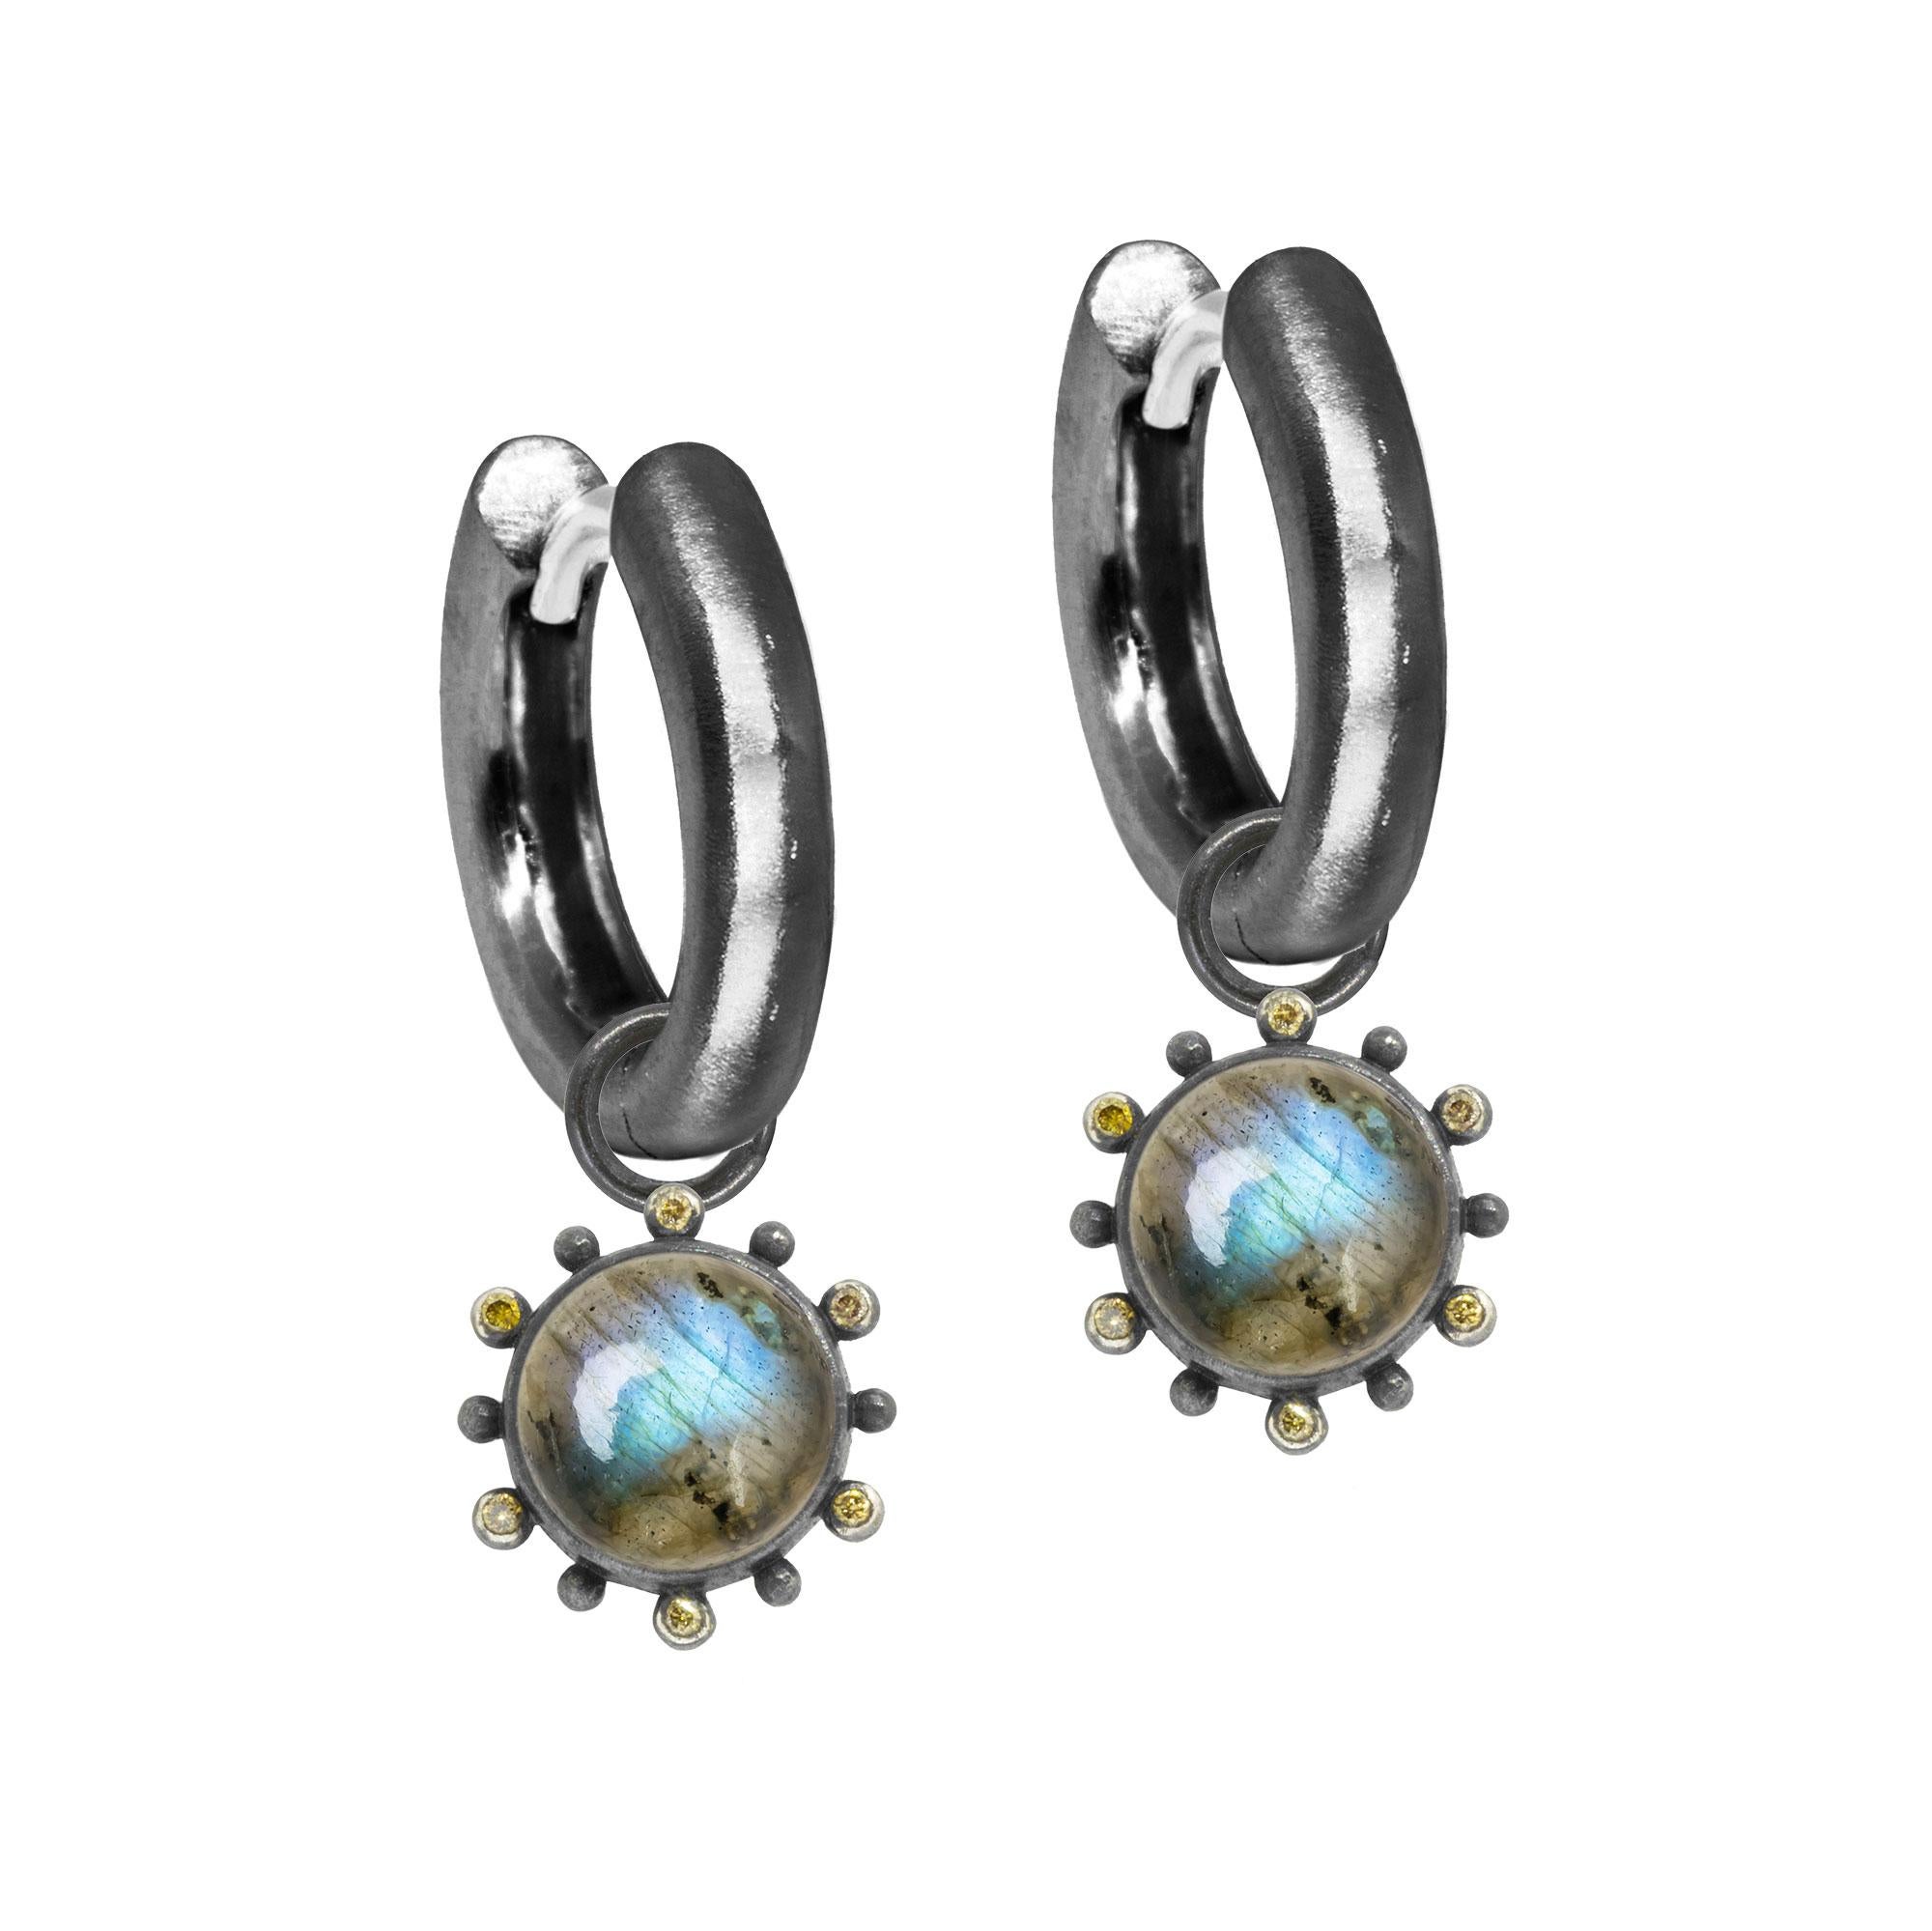 Nina Wynn Design's patent-pending earrings have an element on the back of the stud or charm to allow these pieces to transformed into multi-use, stackable and convertible styling. It can be turned into a pendant and worn on a necklace, or used as a